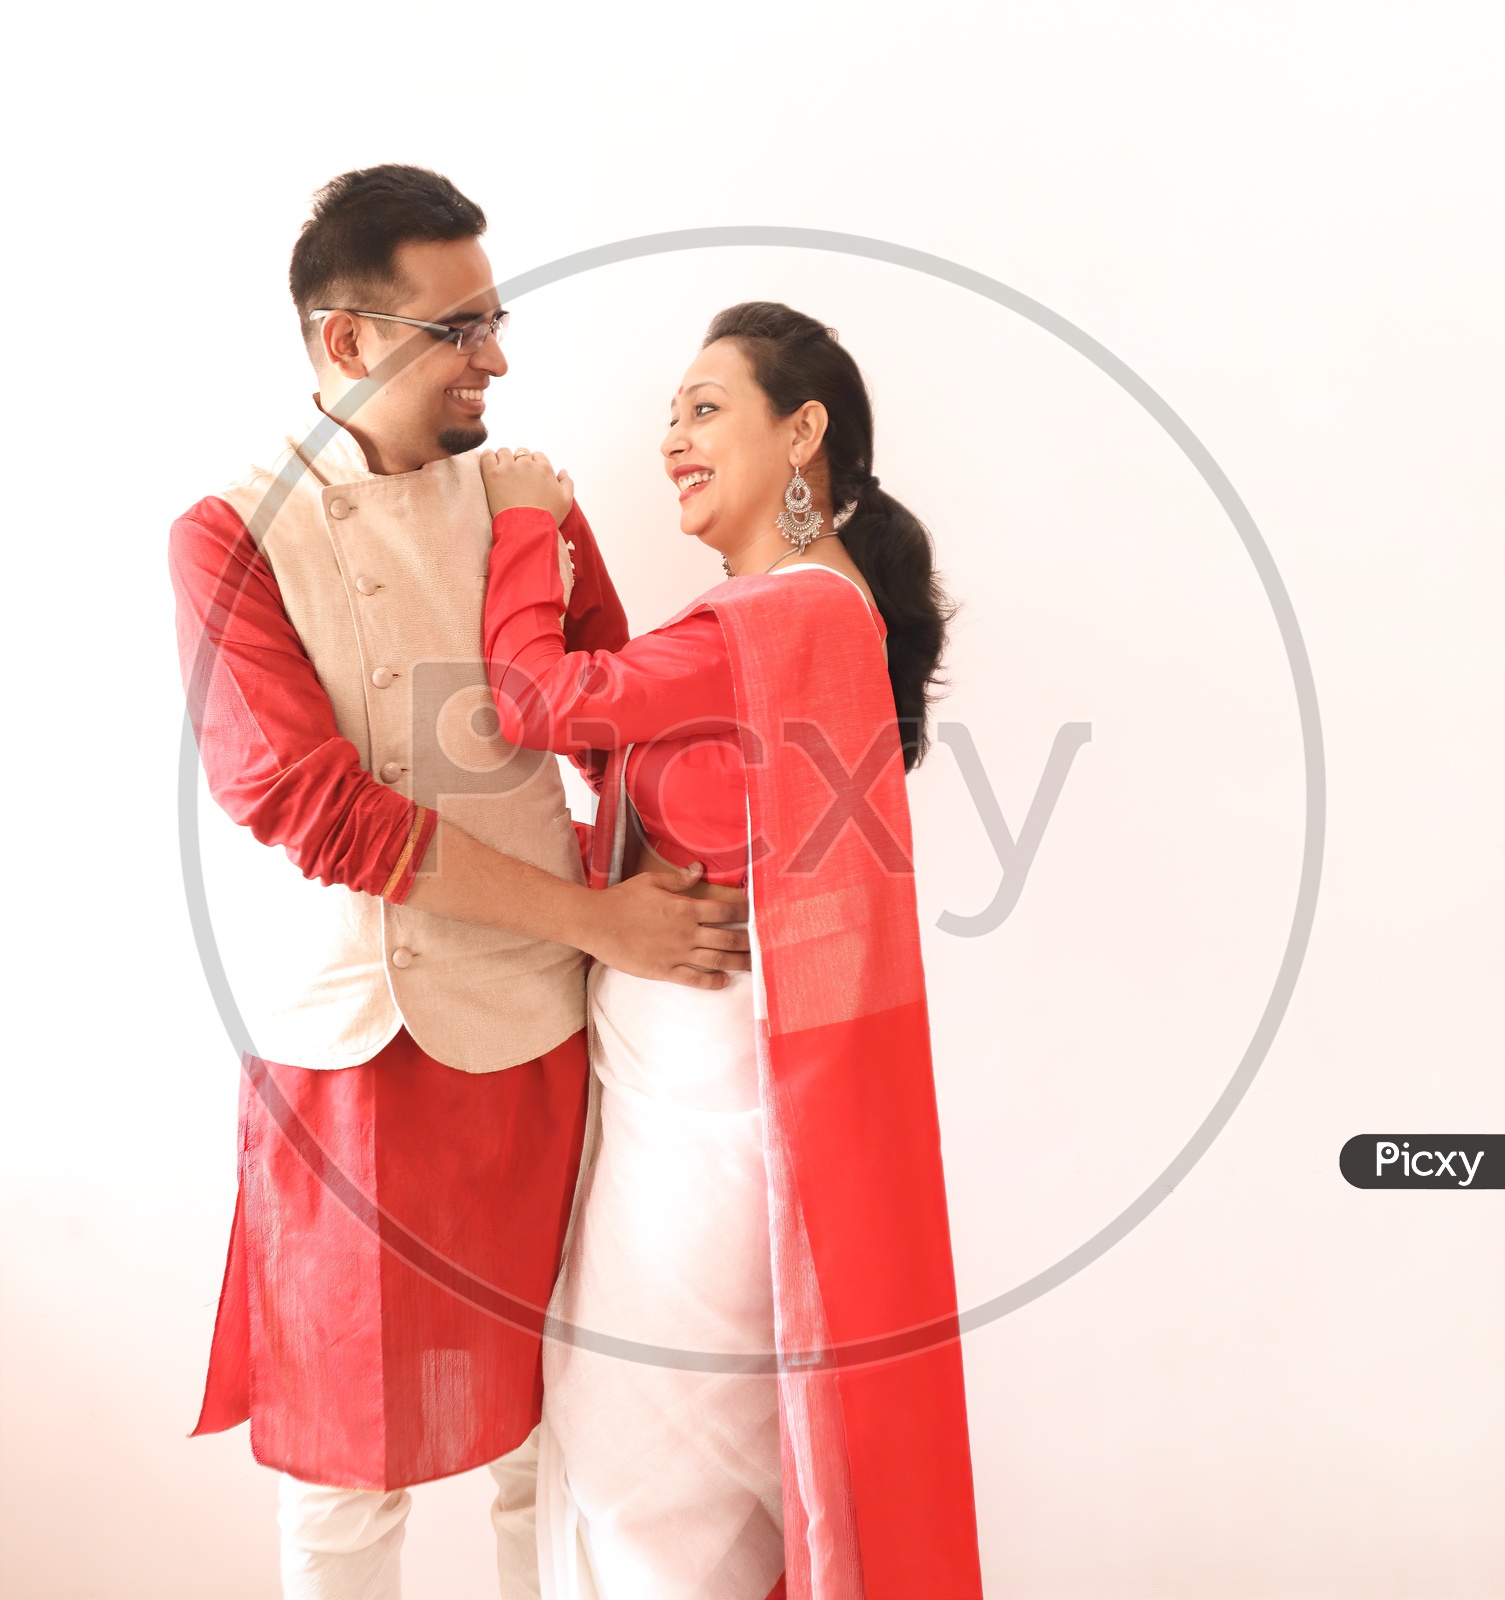 A Young Indian Bengali Assamese Married Romantic Couple Dressed In Red And White Ethnic Indian Dress, Looking At Each Other And Smiling